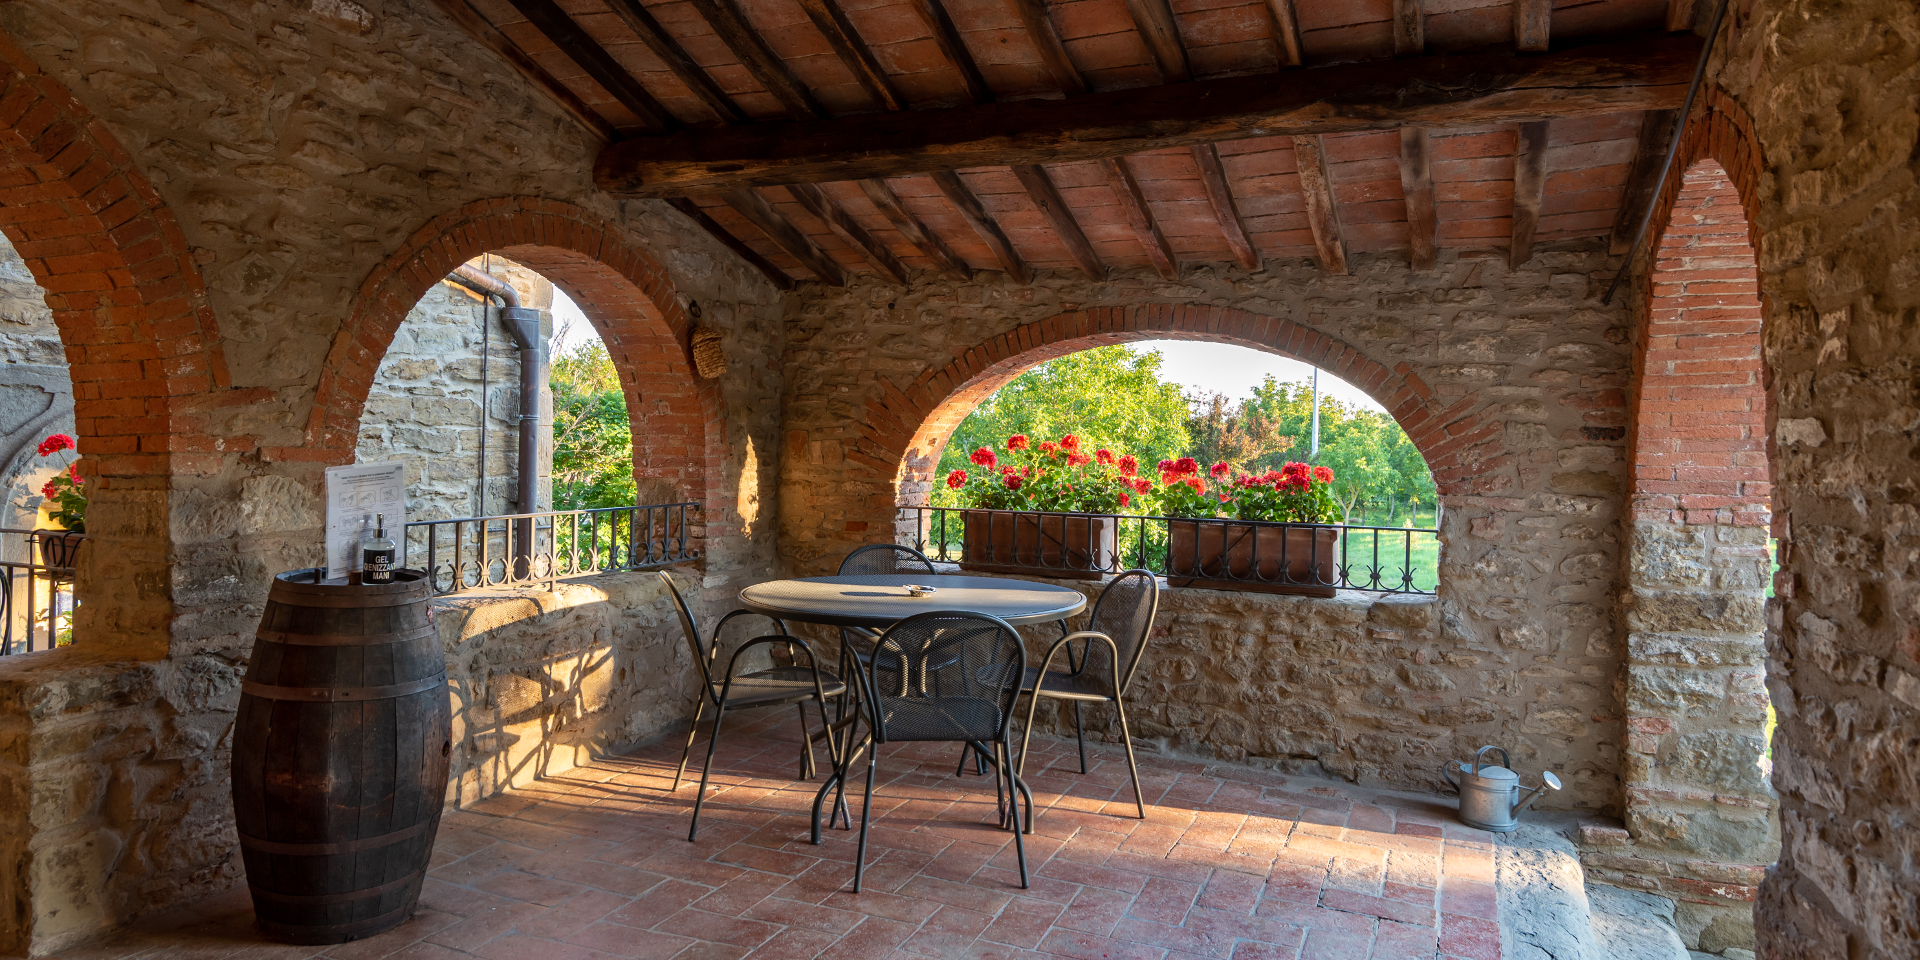 A table with chairs in the shade of an arcade, Monastero San Silvestro Farmhouse